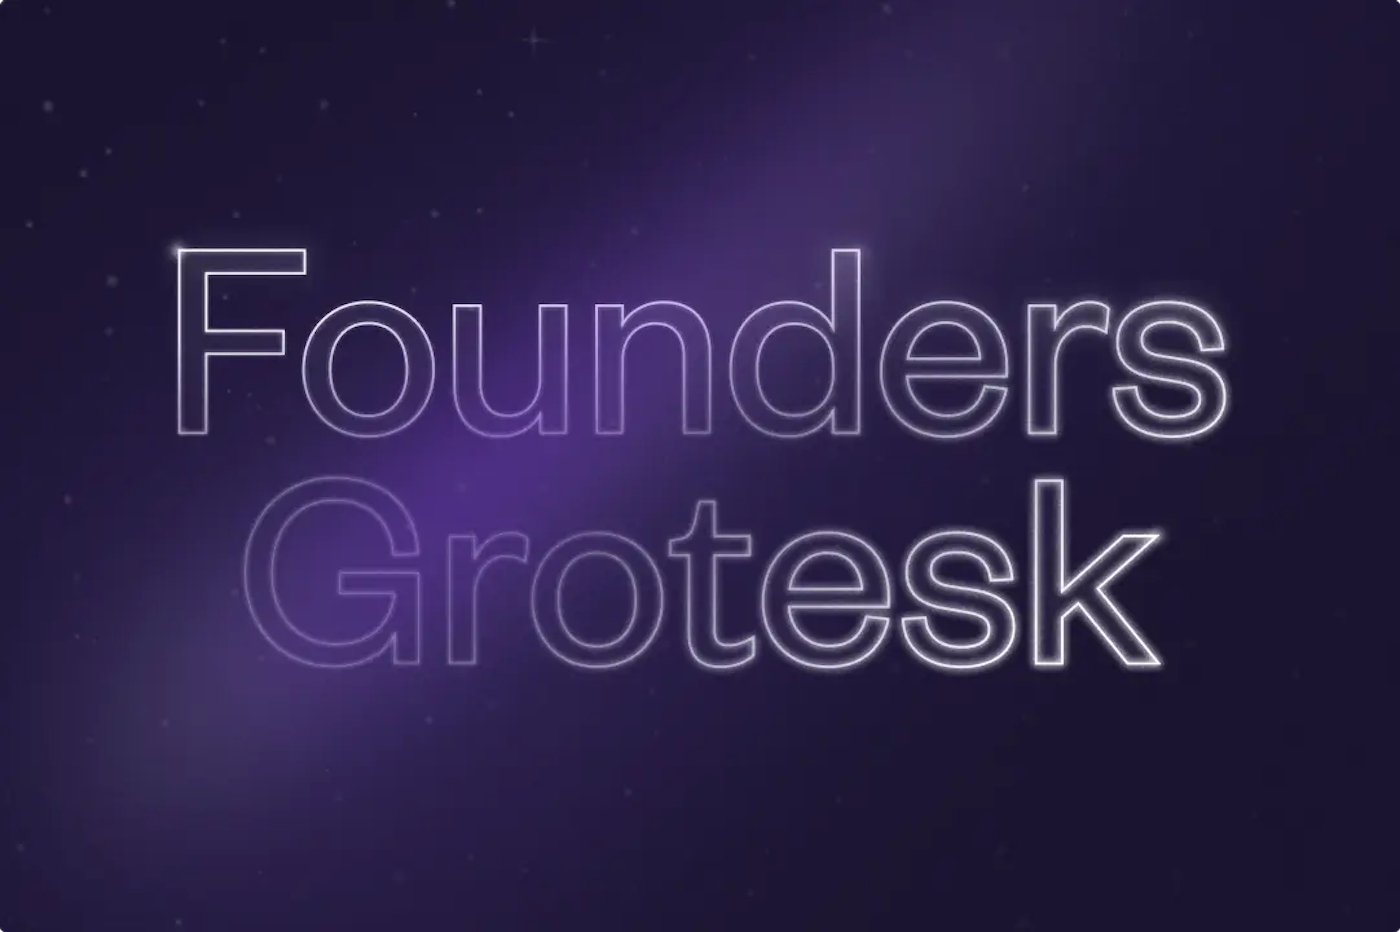 Image that showcase the typeface we've used for Tuple: Founders Grotesk